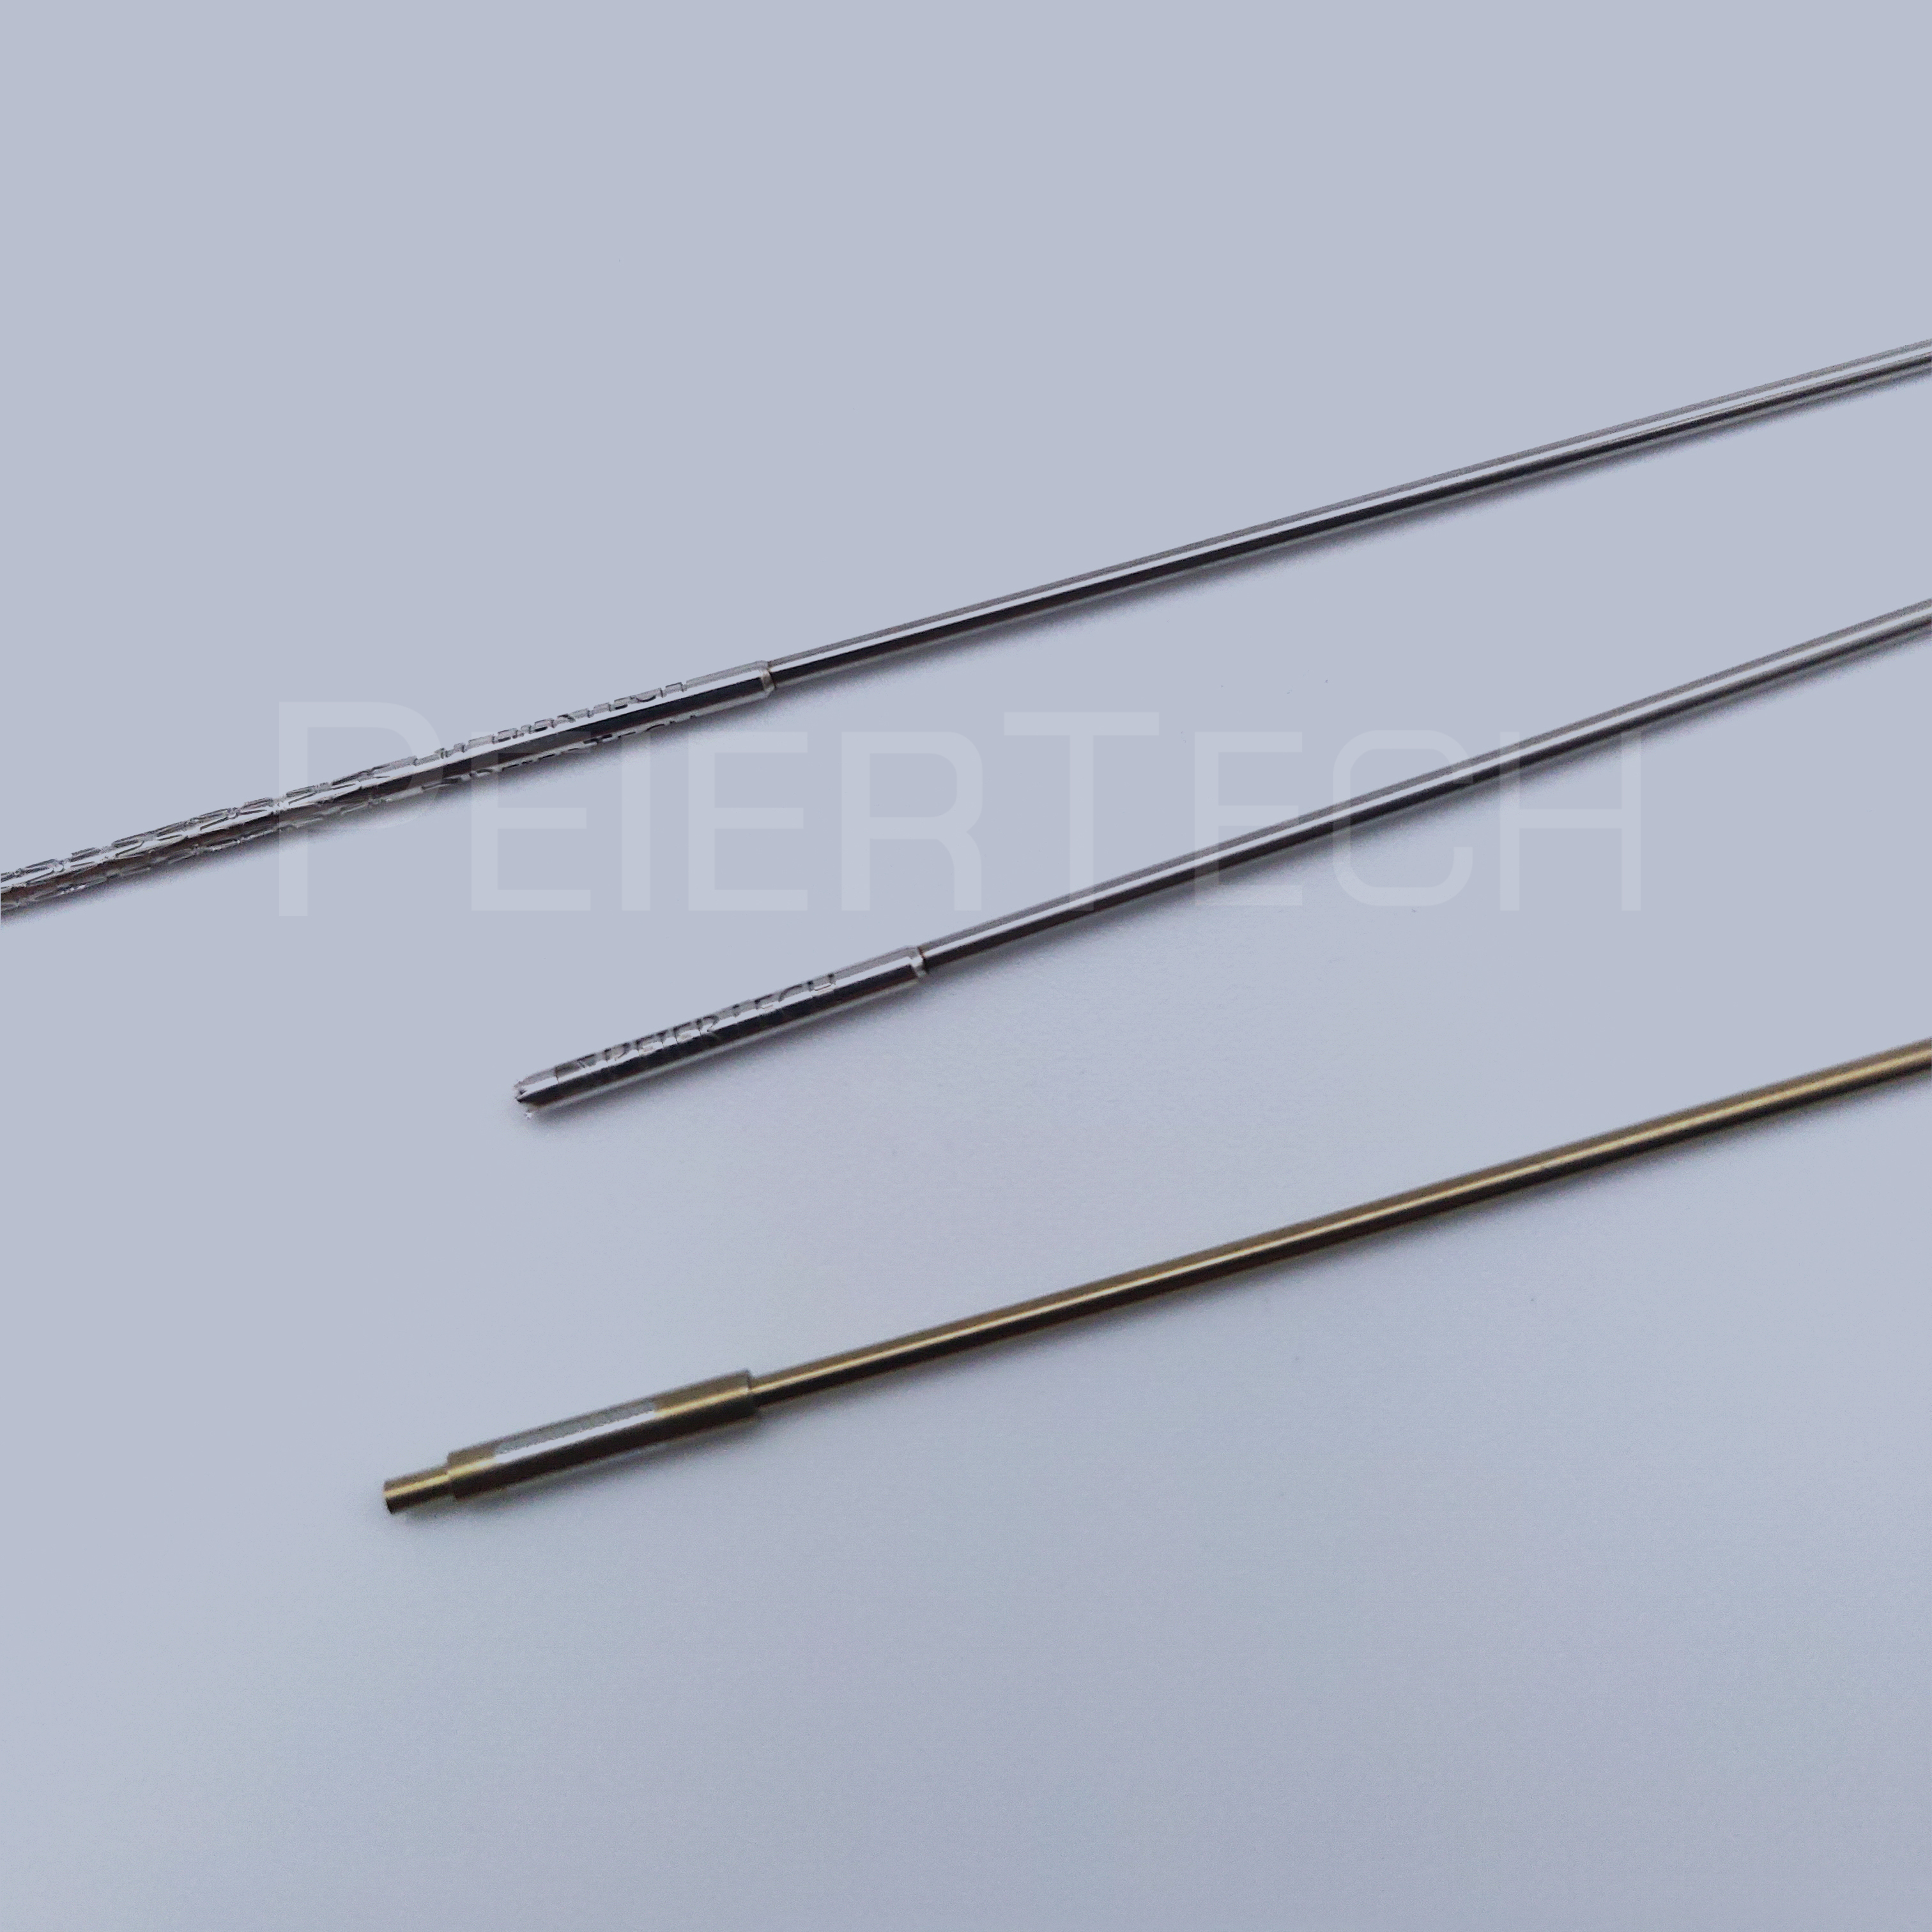 Nitinol Component Nitinol Welding Custom manufacturing of implants and other components for medical device